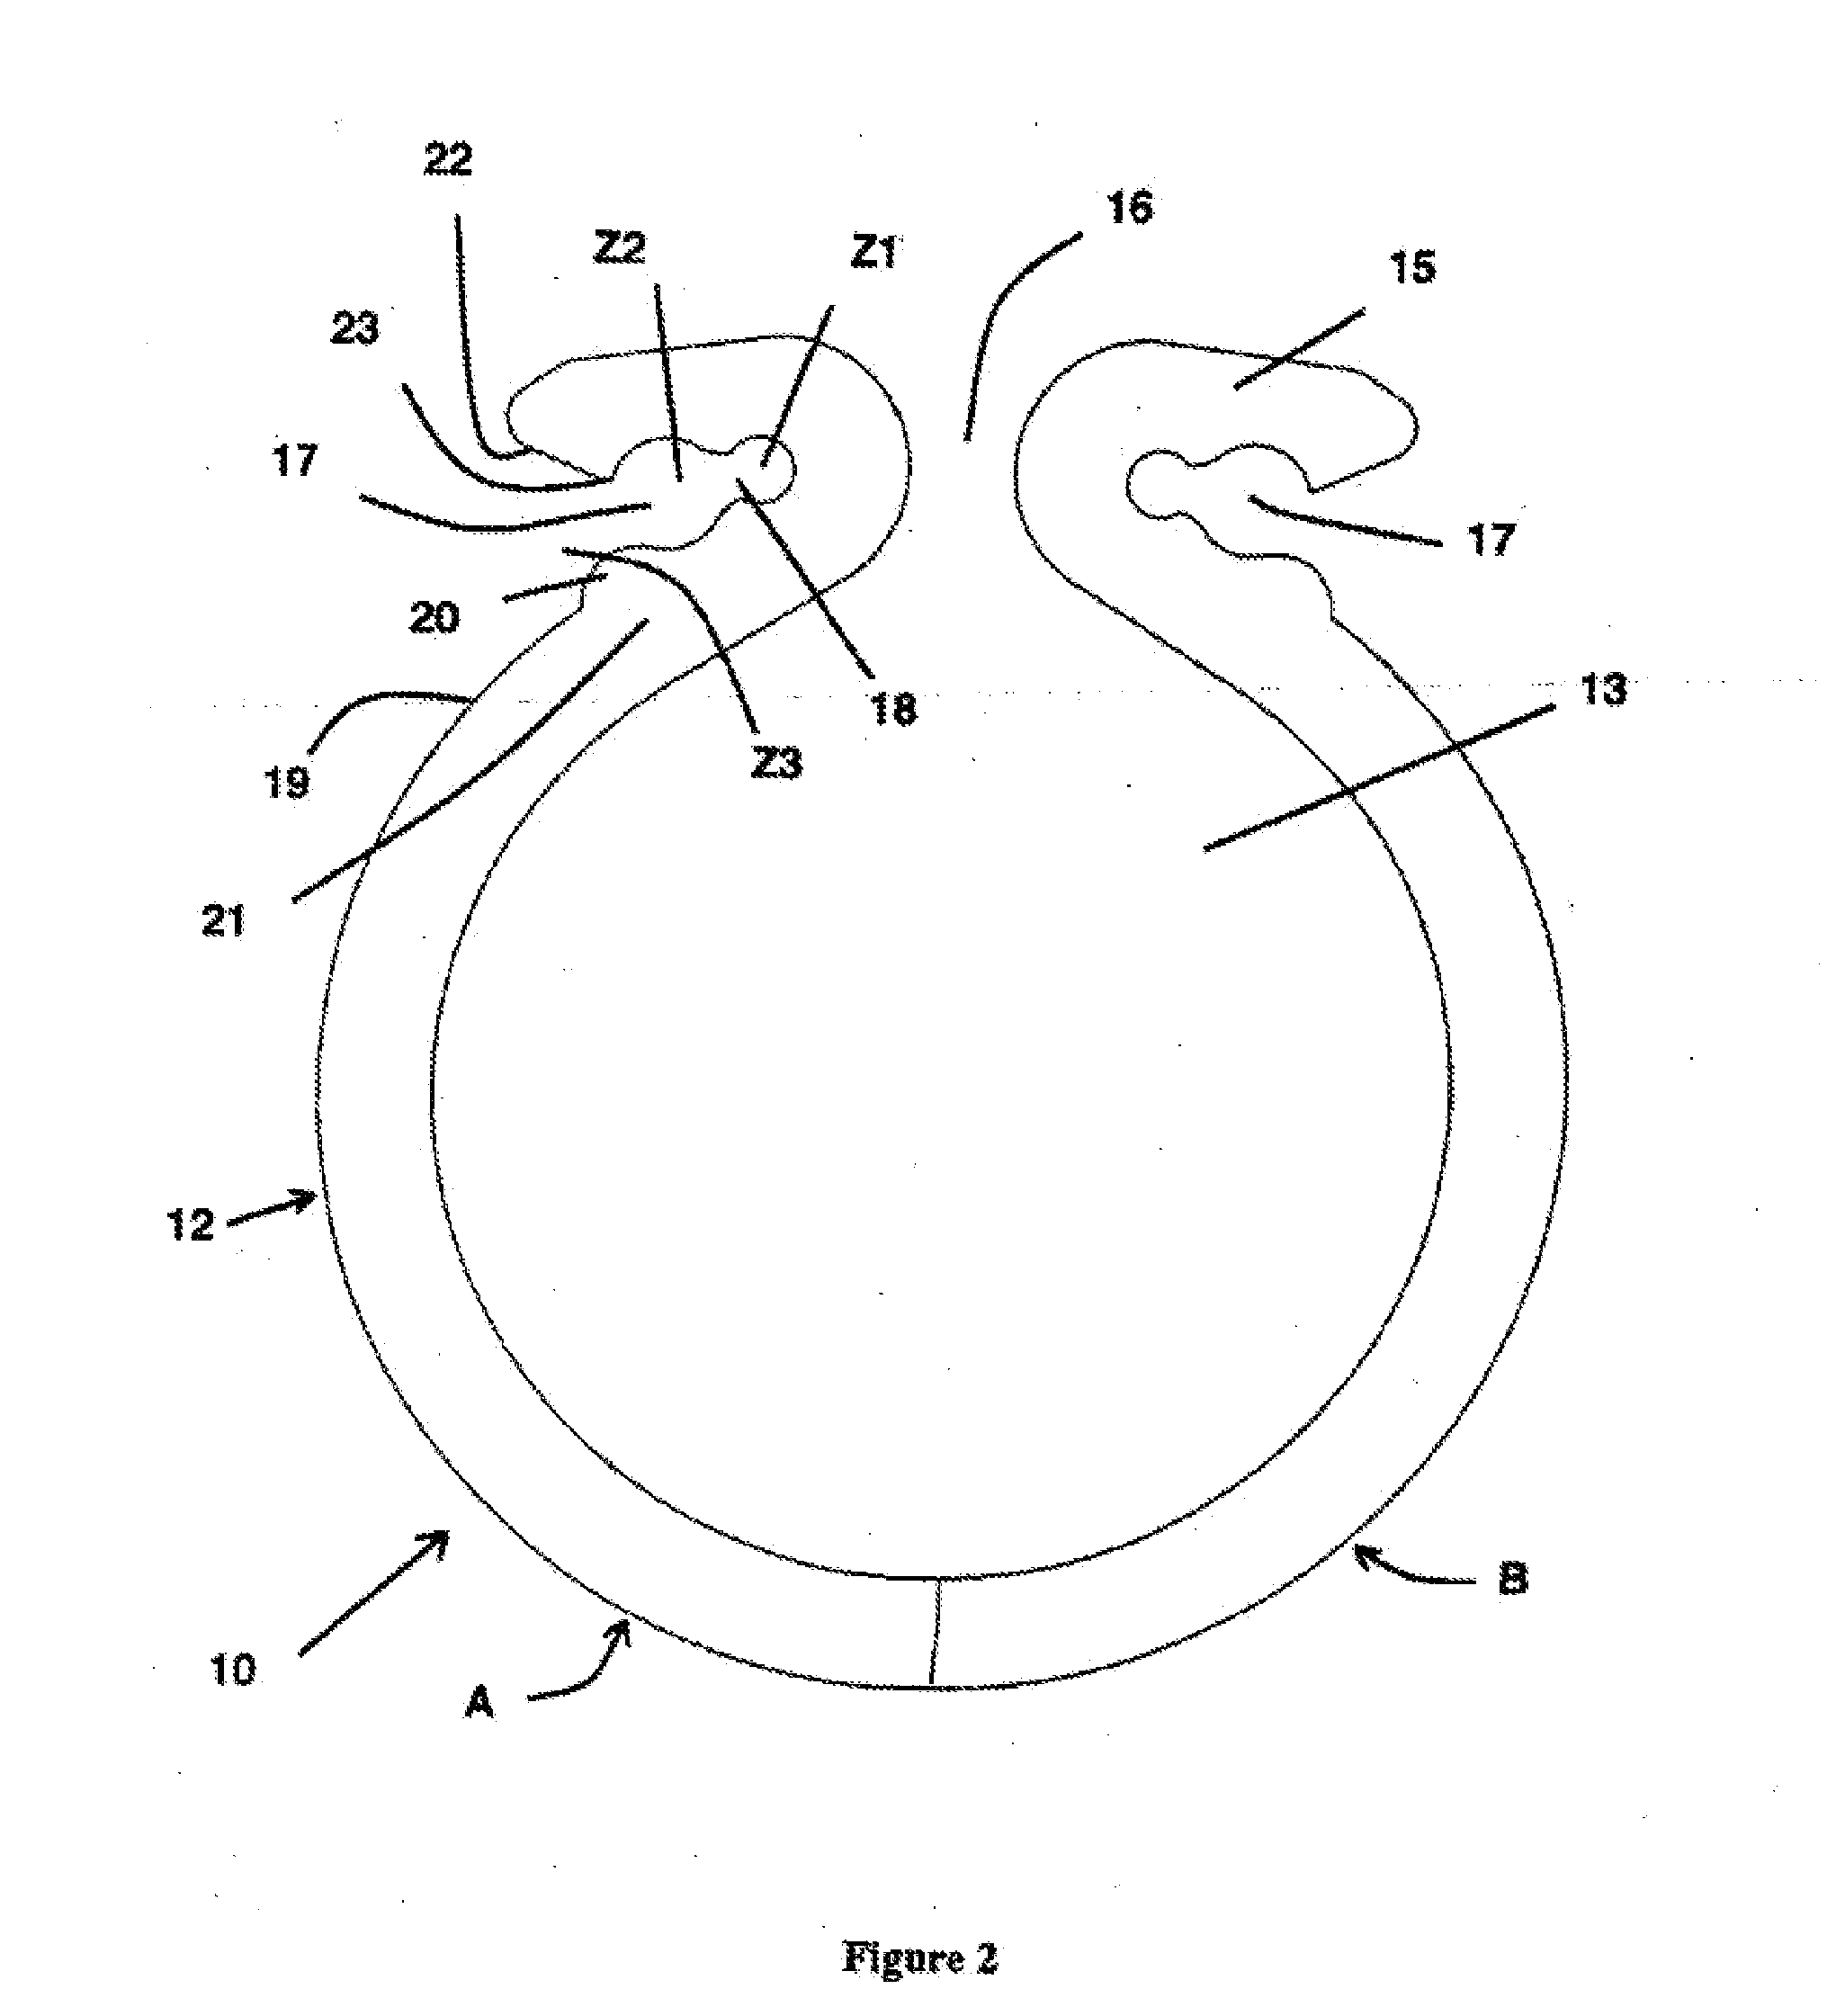 Device for fastening and holding a creeping plant along a carrying wire